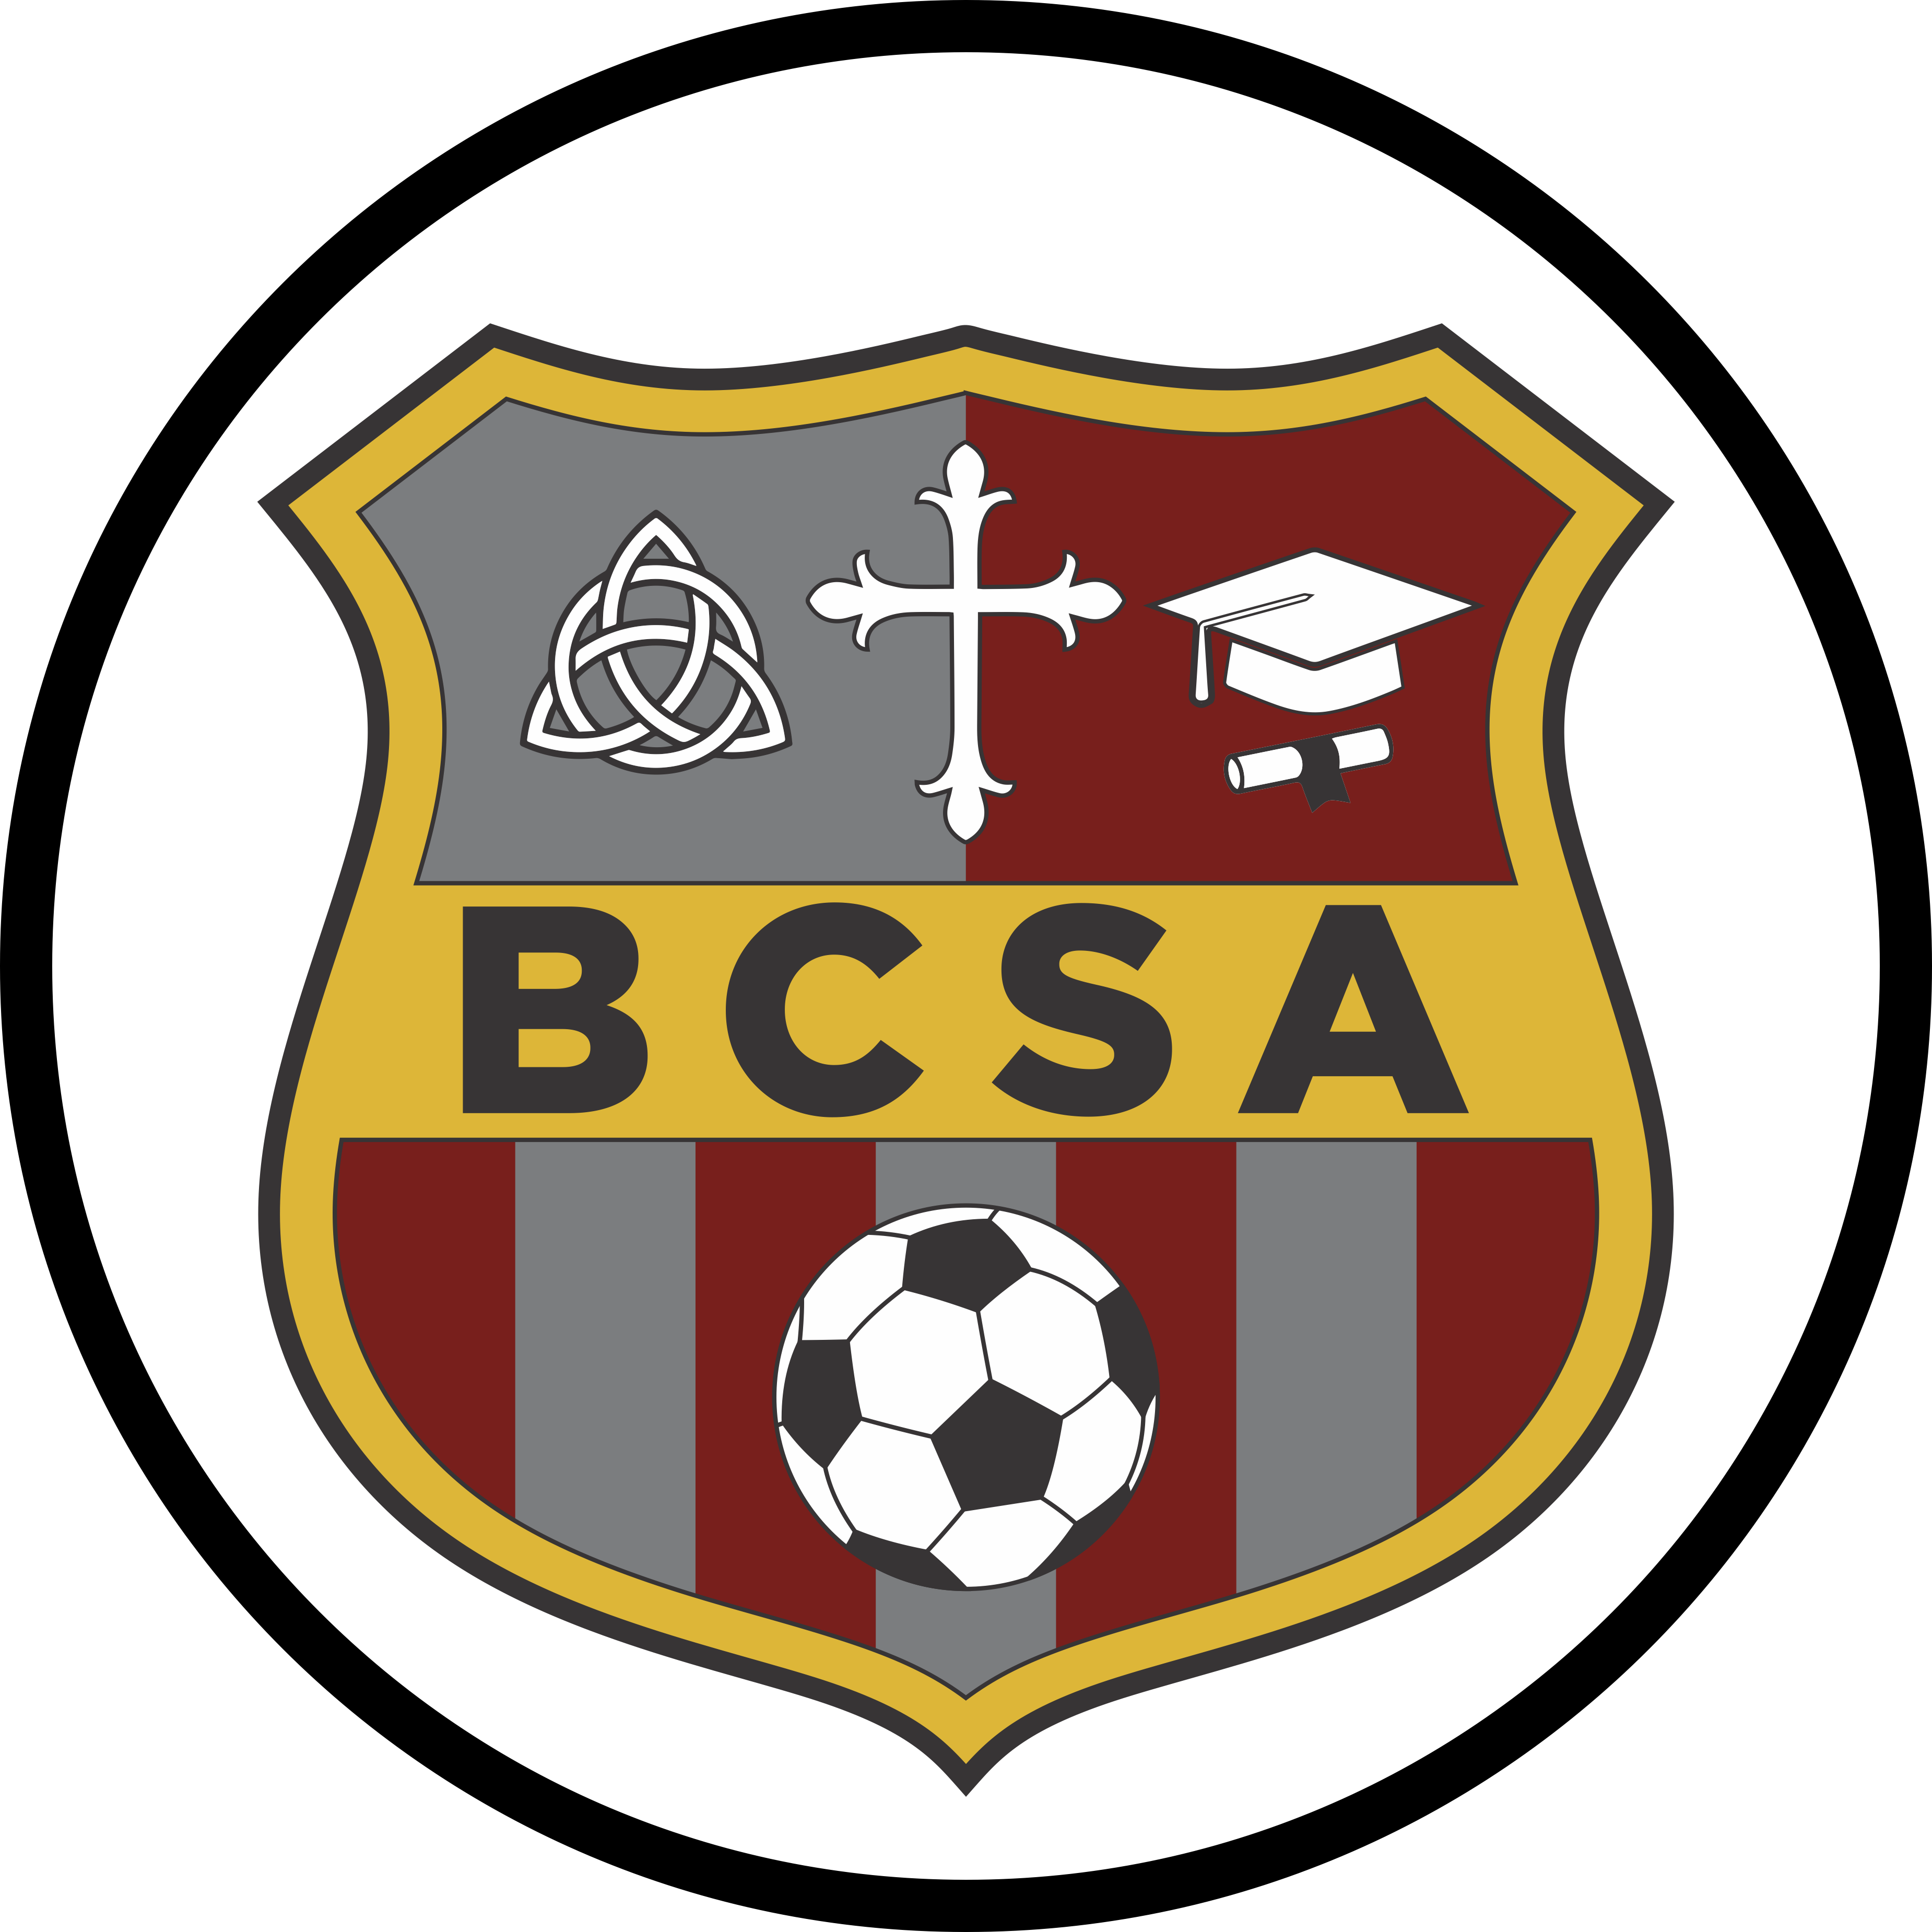 BCSA is a soccer club located in Delran, NJ dedicated to high level player development through a curriculum centered around complete ball mastery.